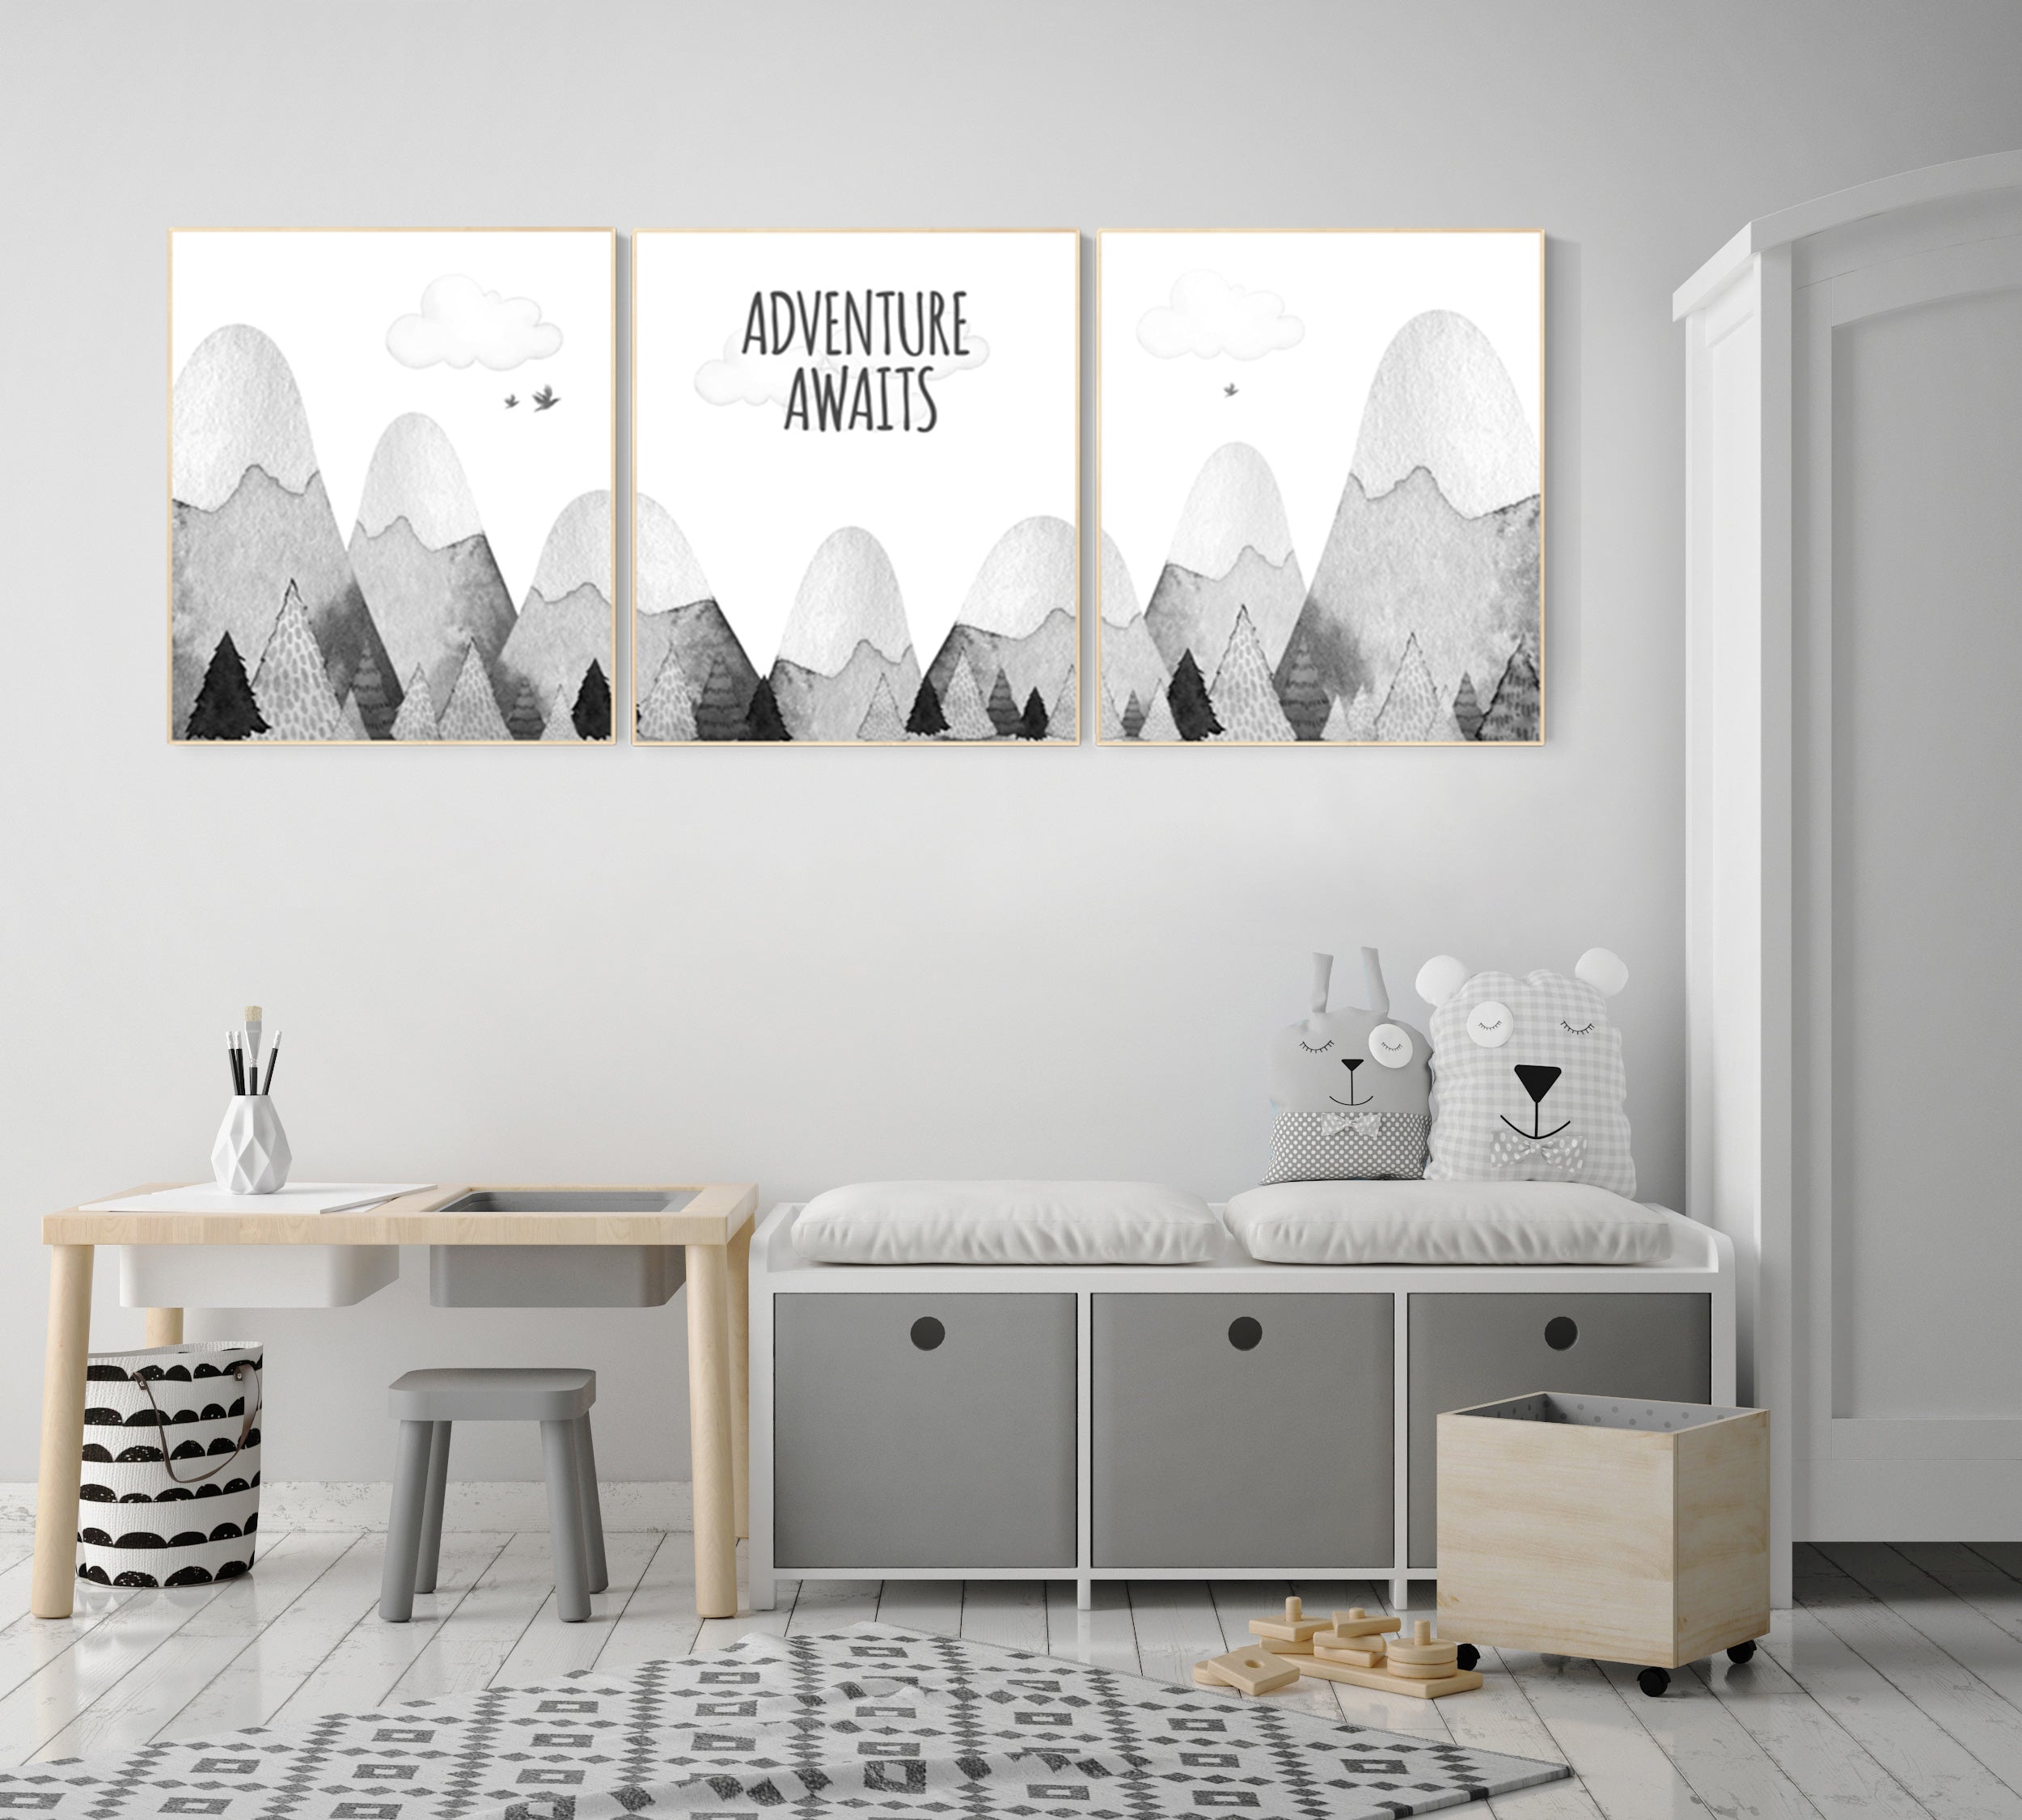 Nursery Soft Blue Gray Mountain Landscape and Little Hot Air